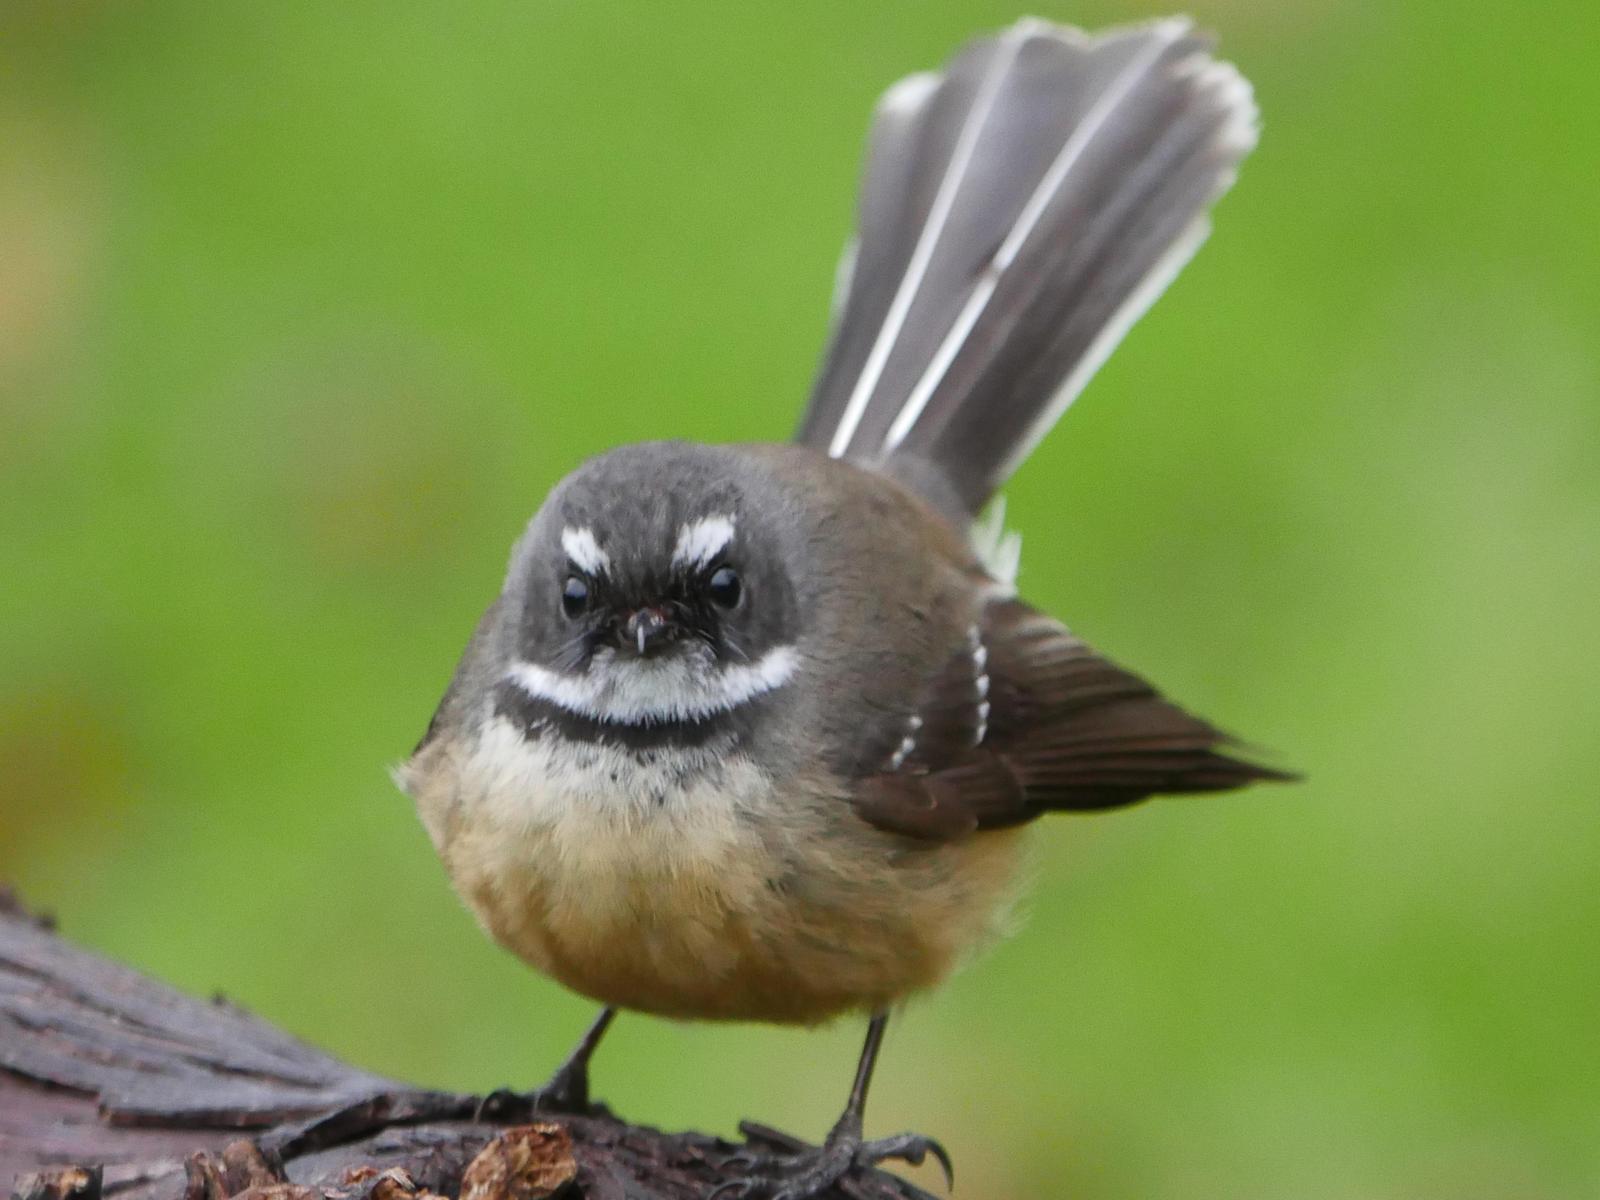 New Zealand Fantail Photo by Peter Lowe